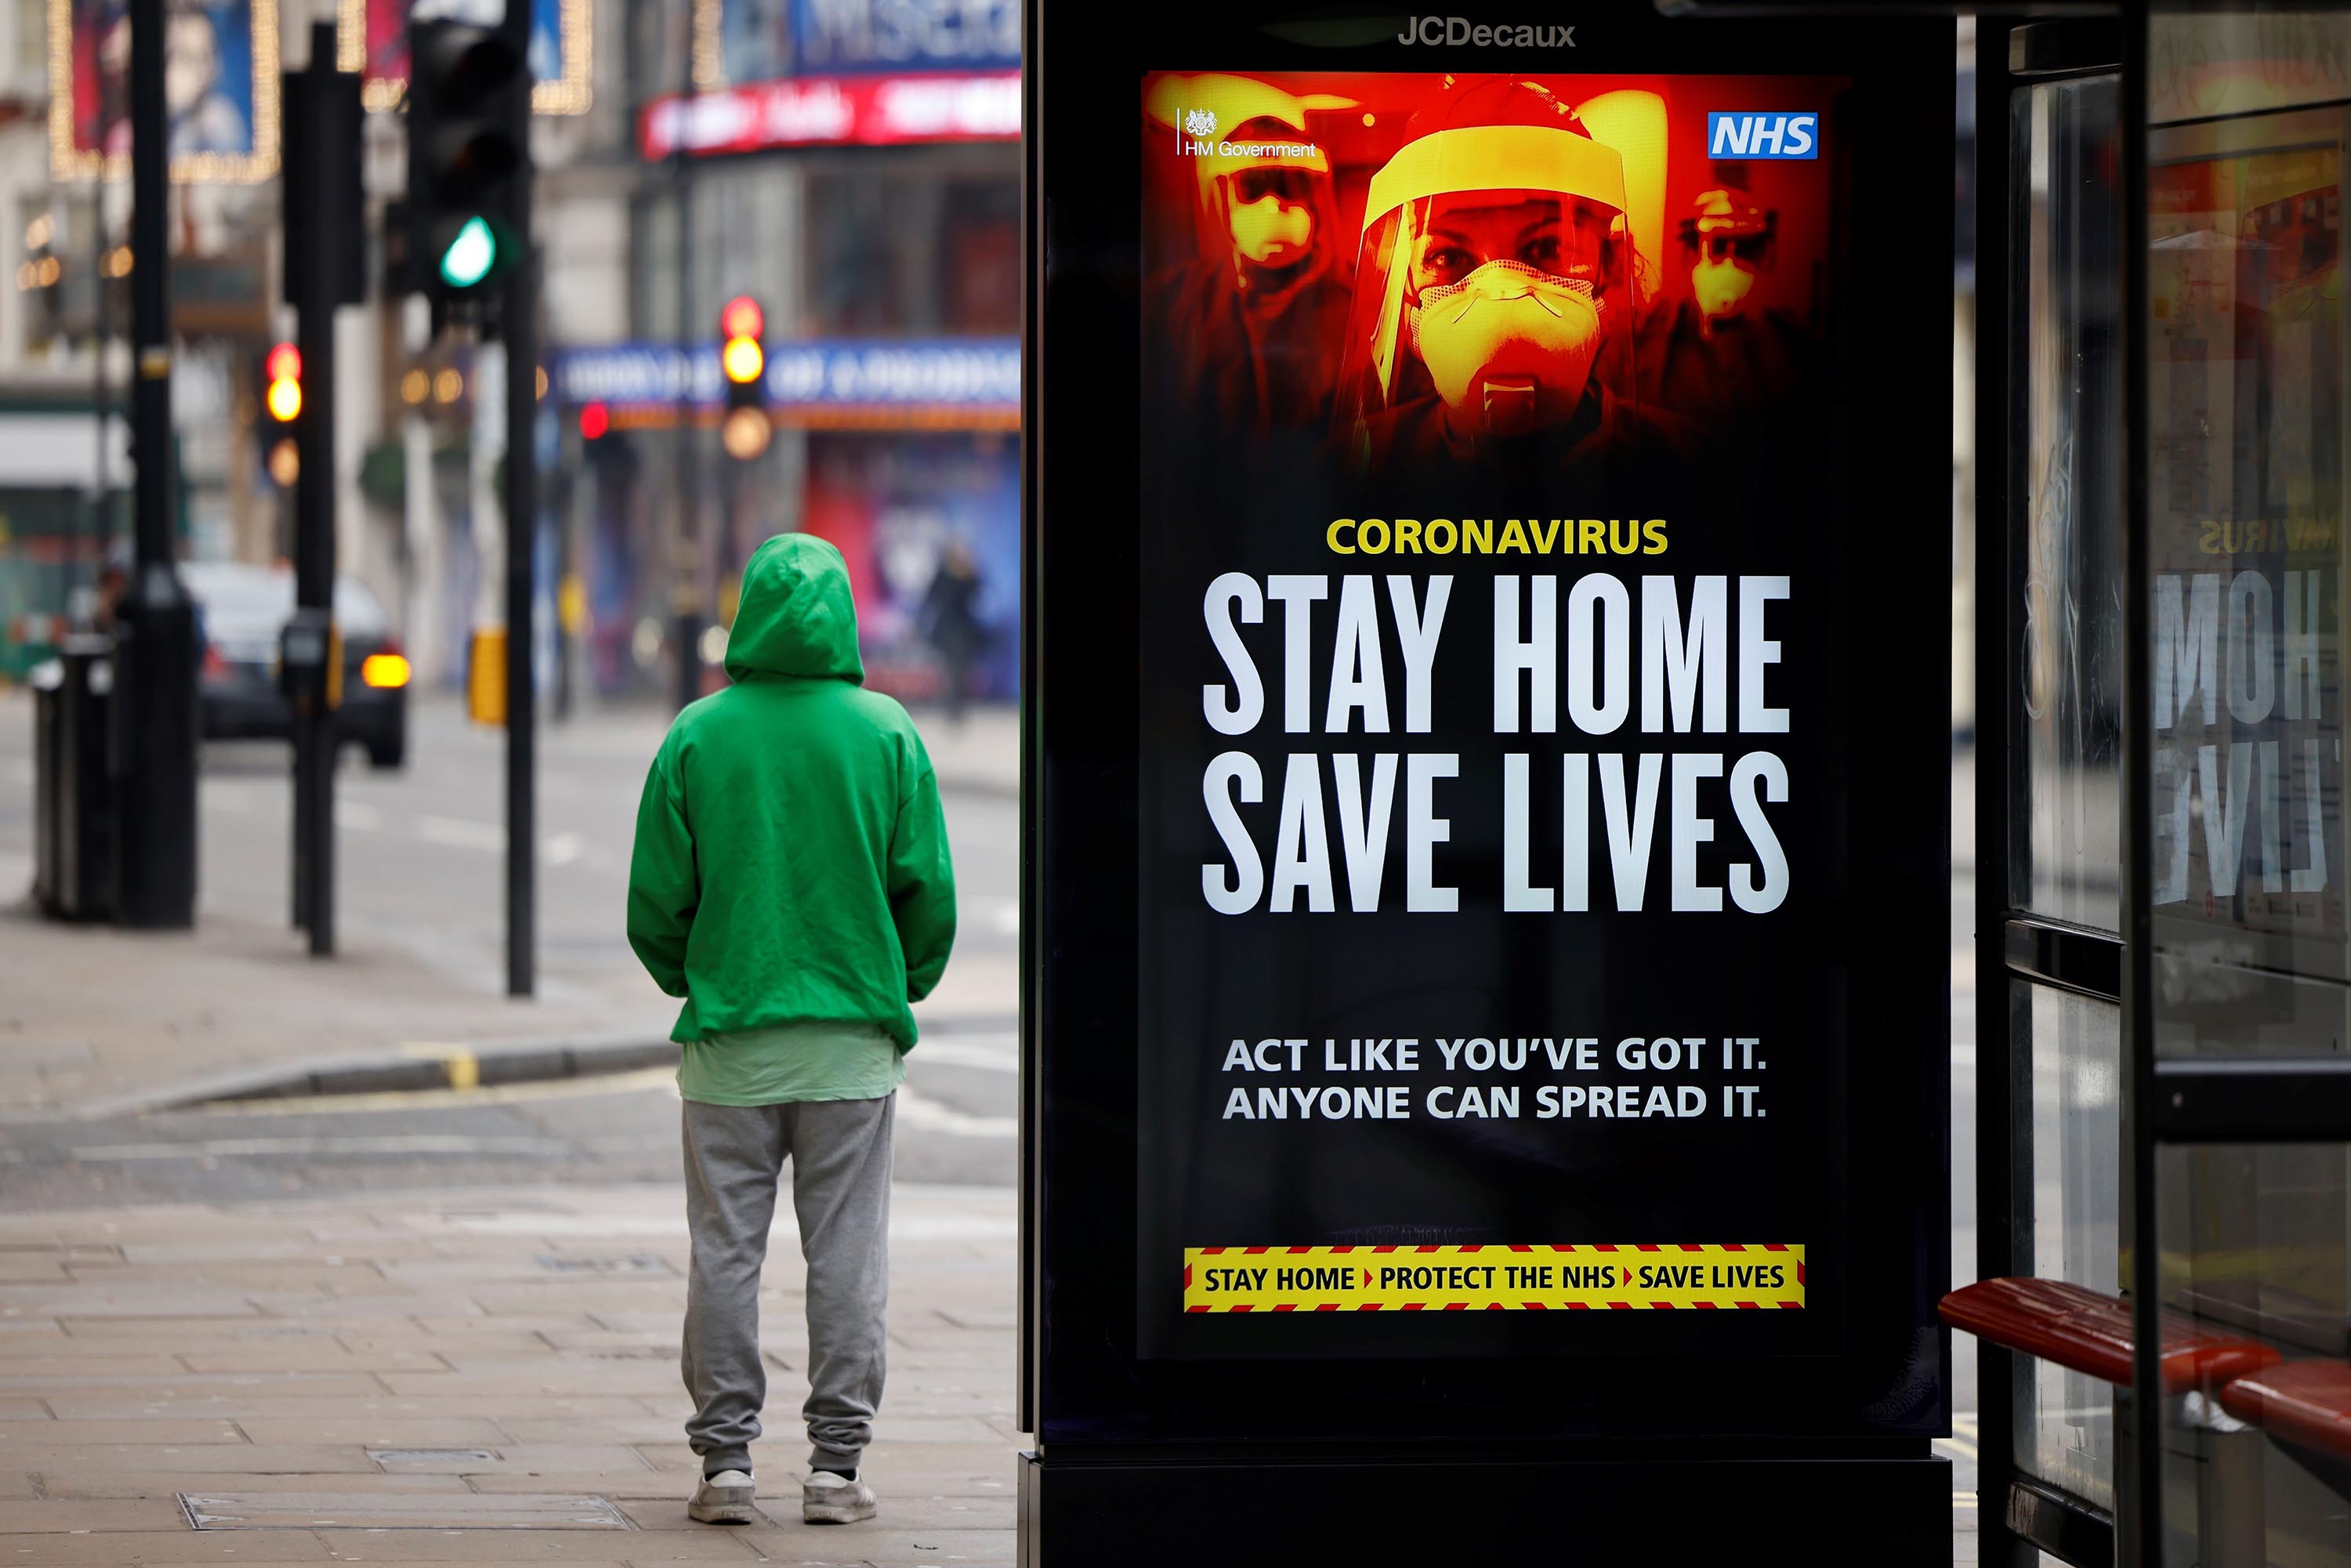 A man stands near signage promoting the UK's National Health Service message, "Stay Home, Save Lives" on a bus shelter in London on January 8.